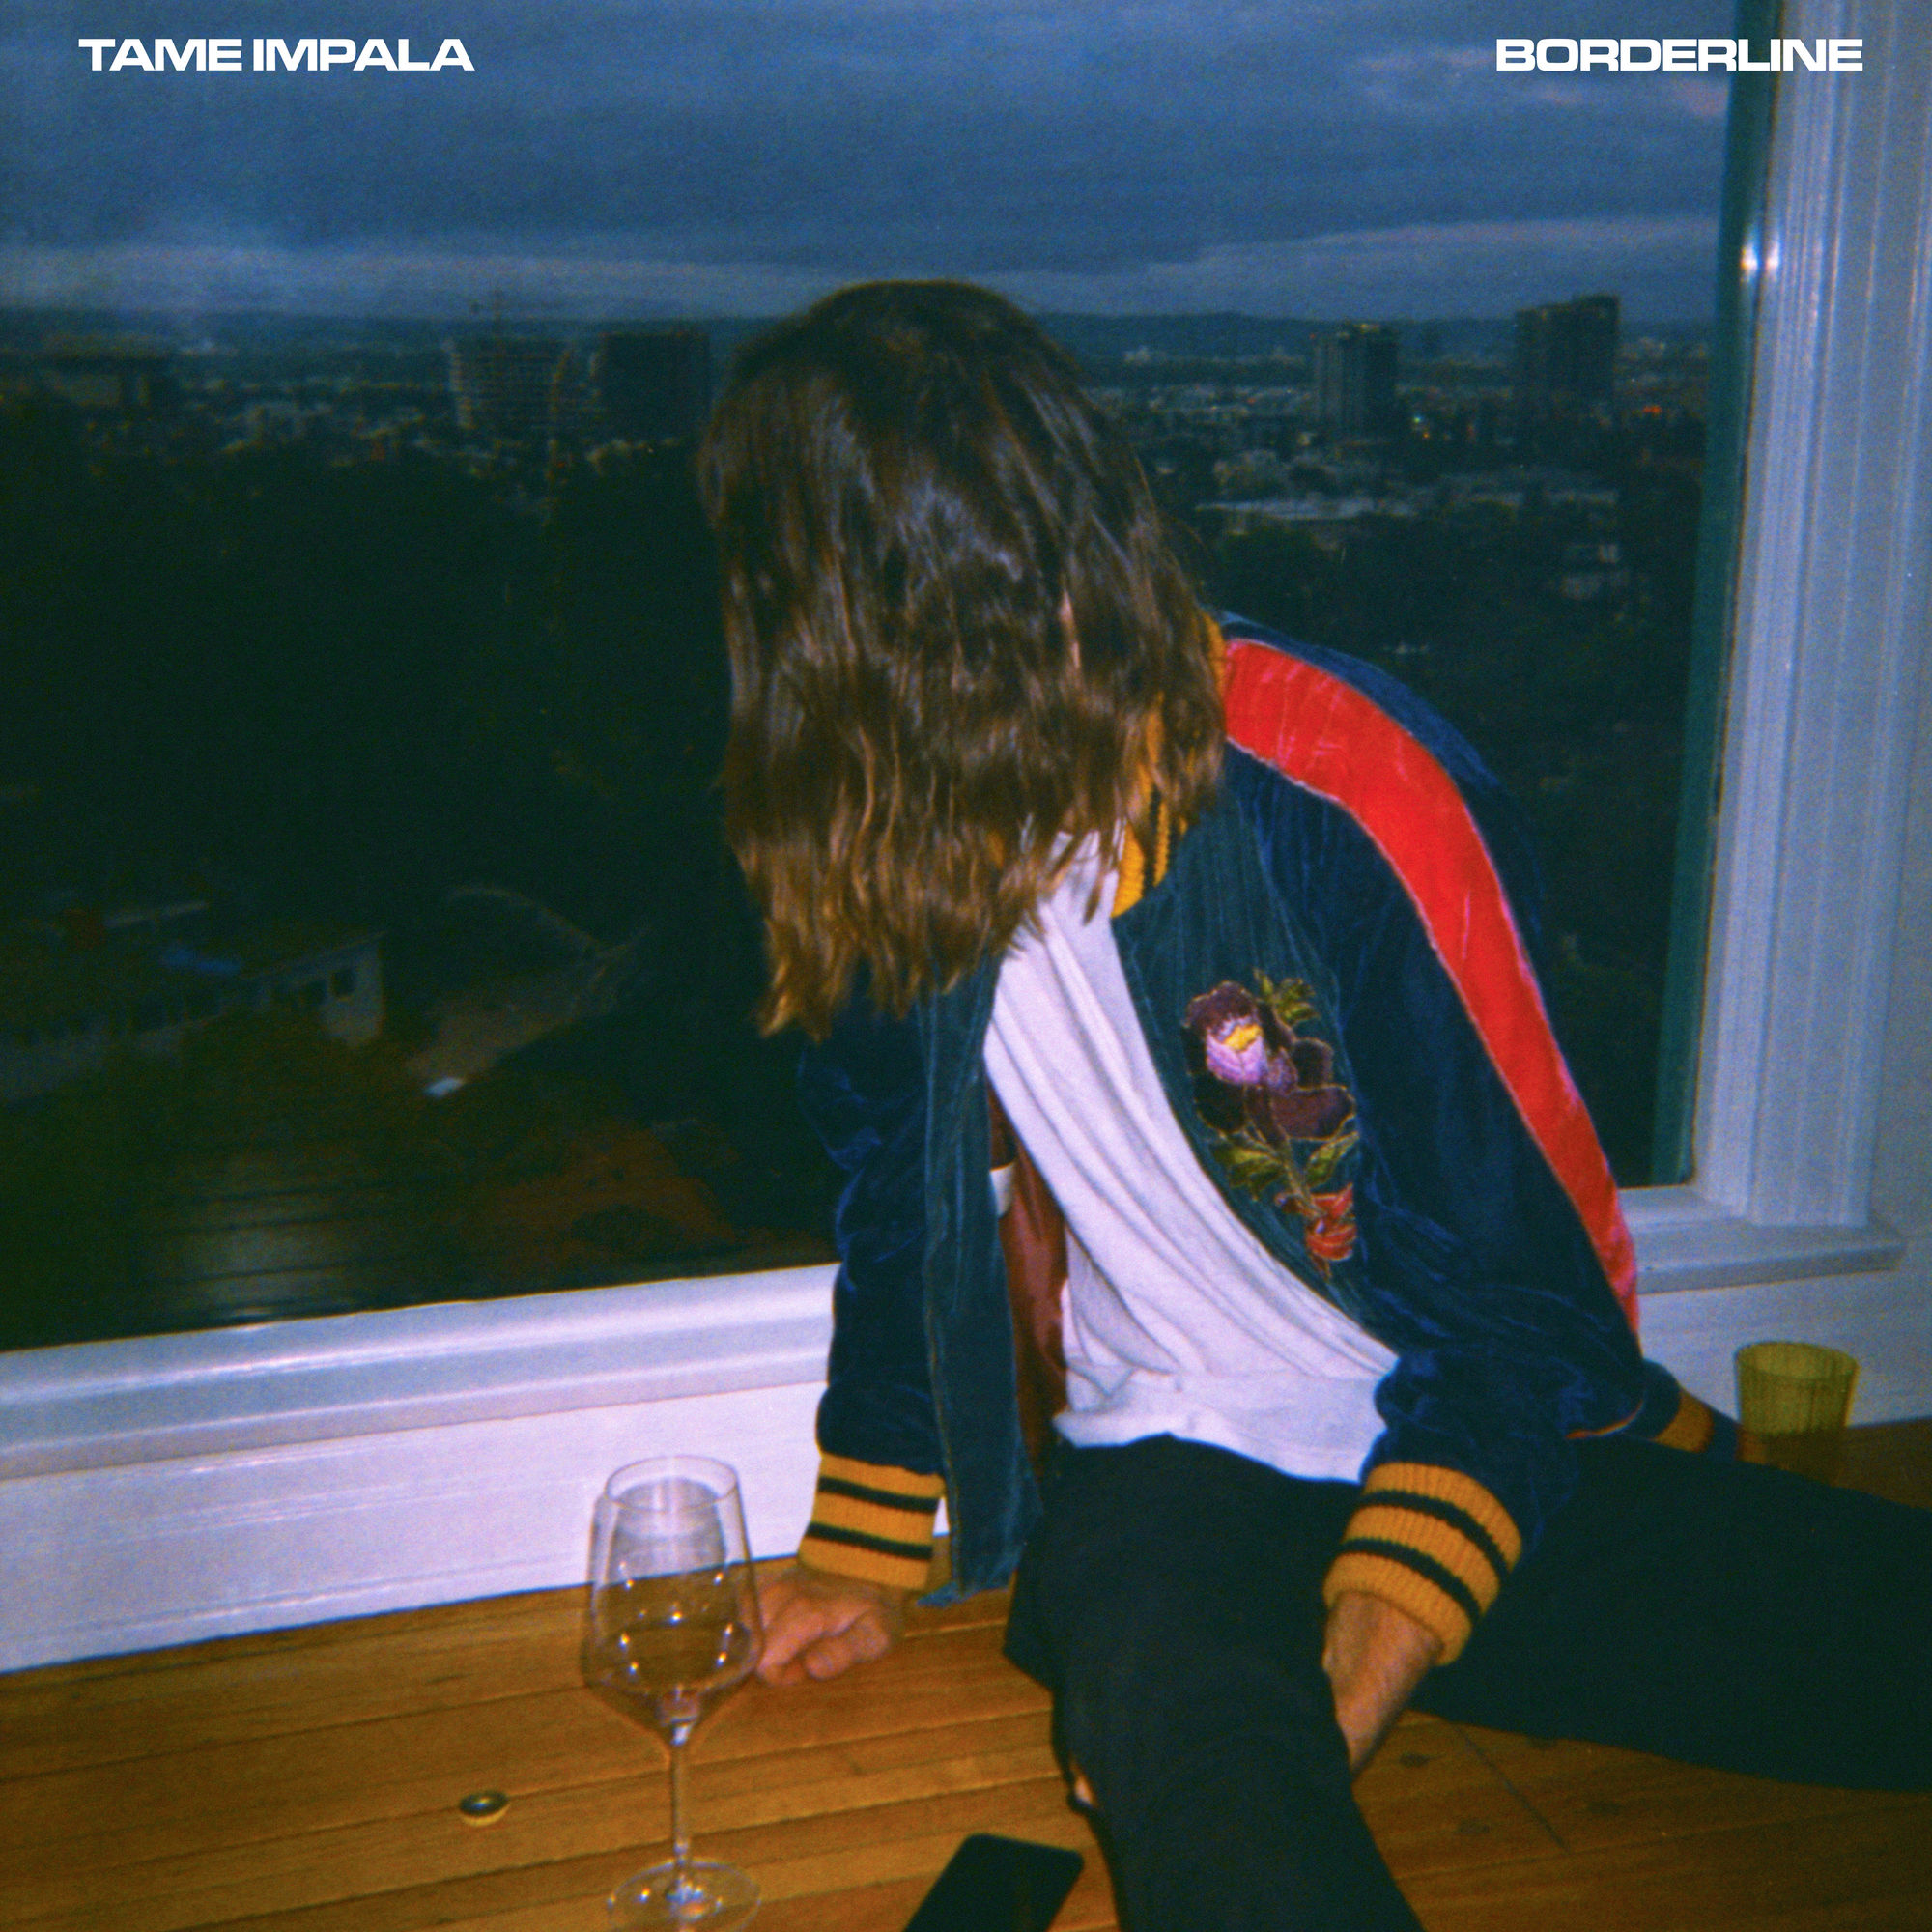 Art for Borderline by Tame Impala